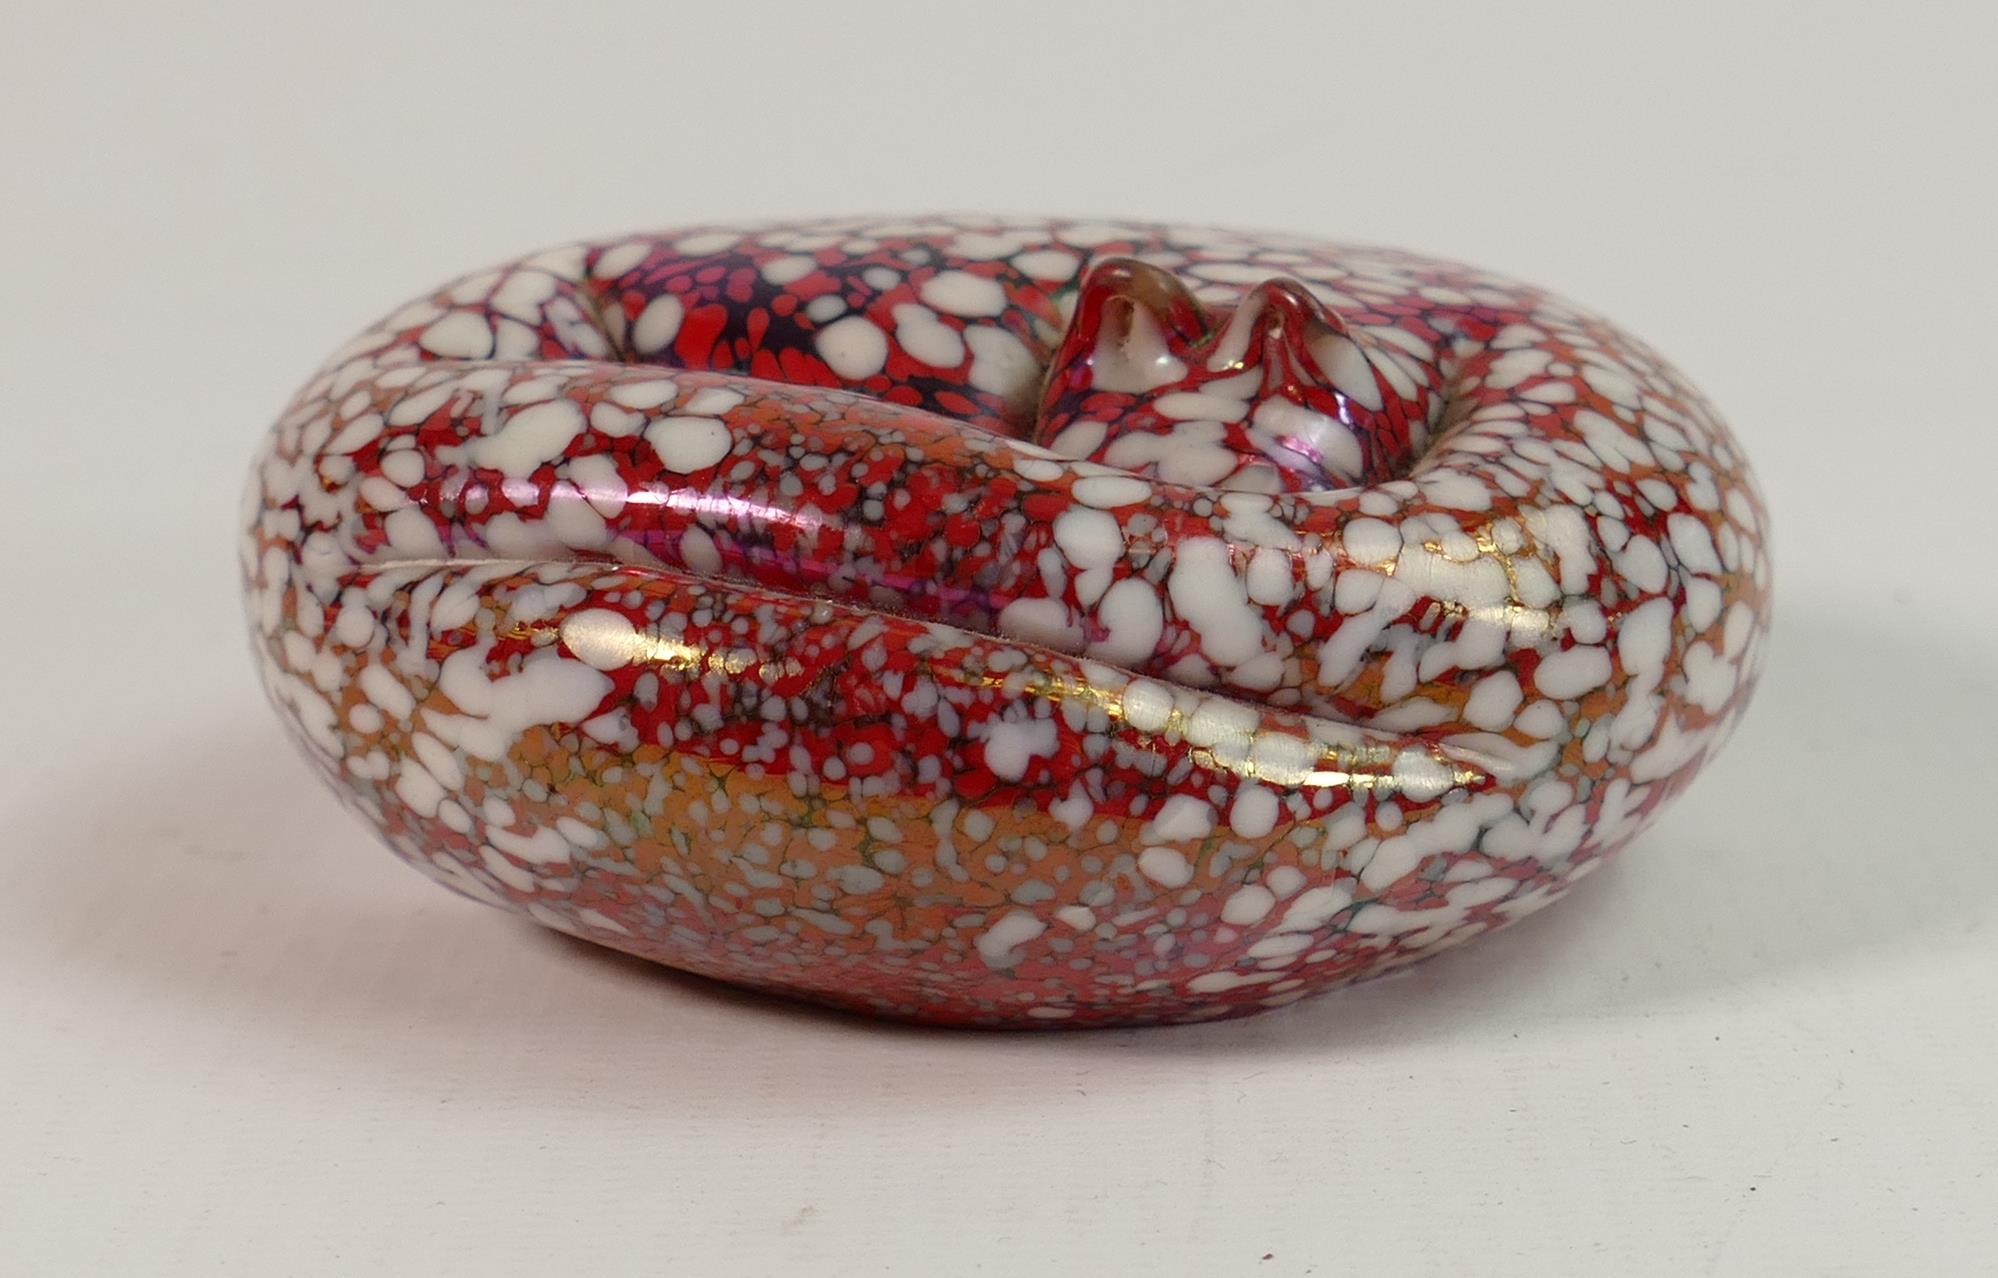 Okra iridescent glass paperweight of a snake: - Image 3 of 3